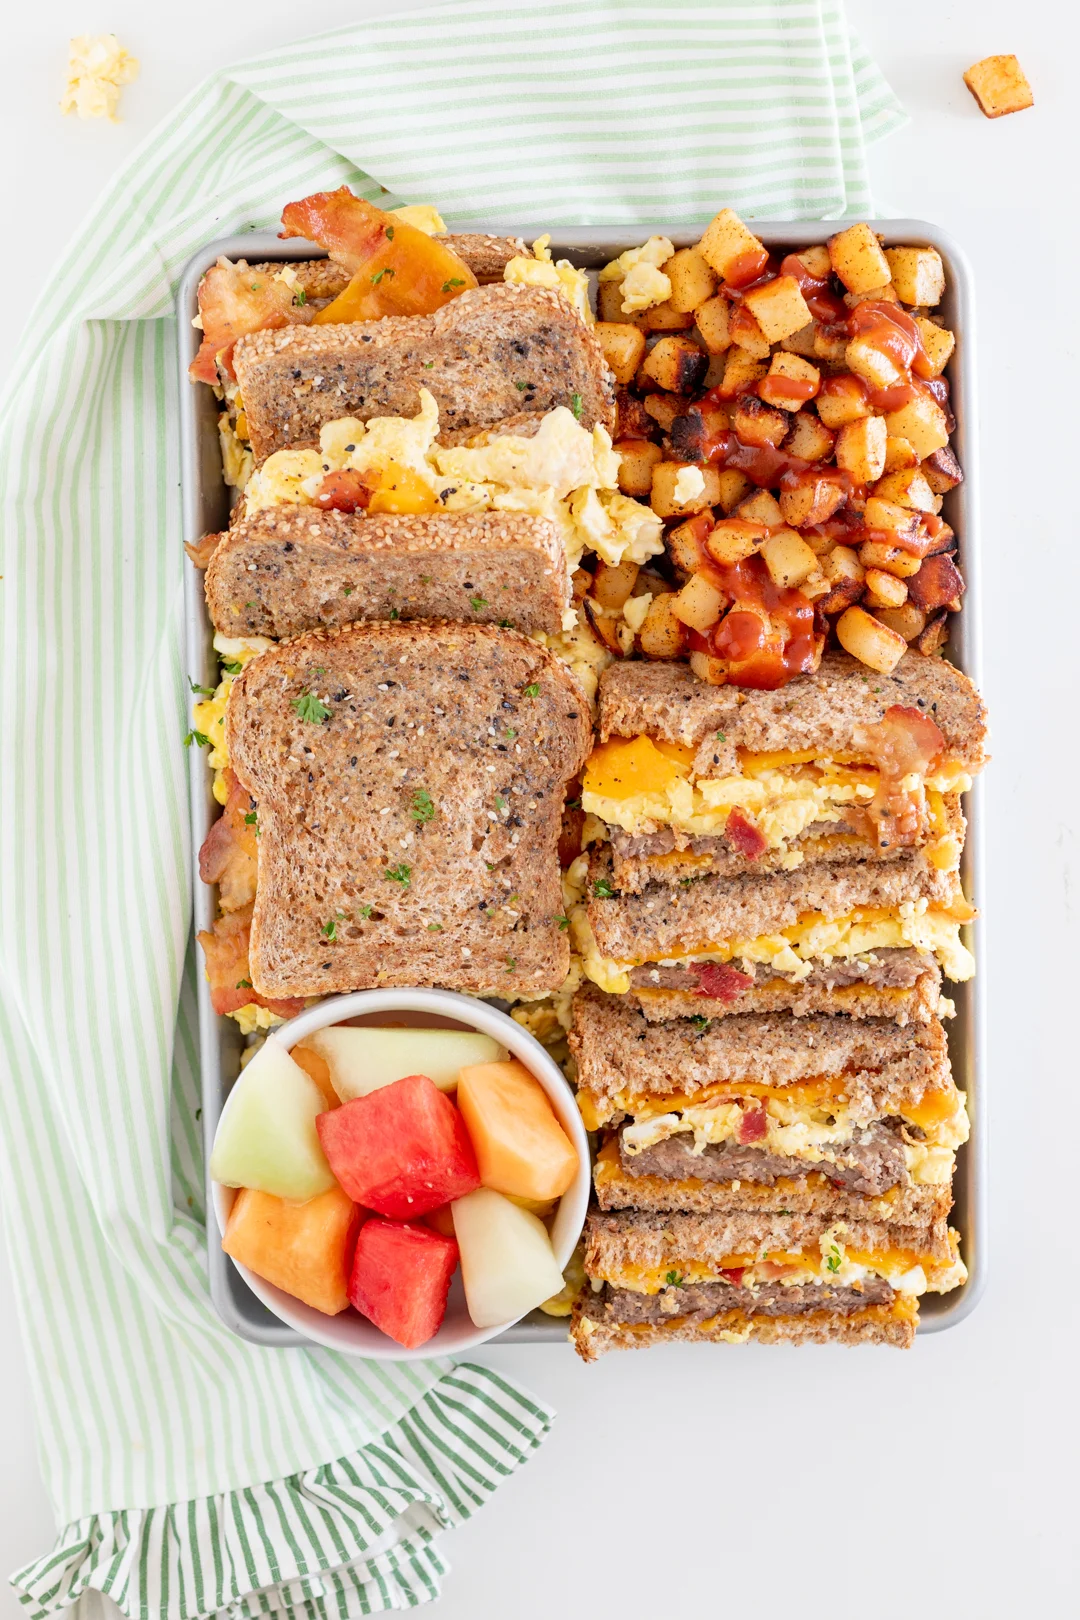 breakfast sandwich charcuterie board with home fries and fruit salad